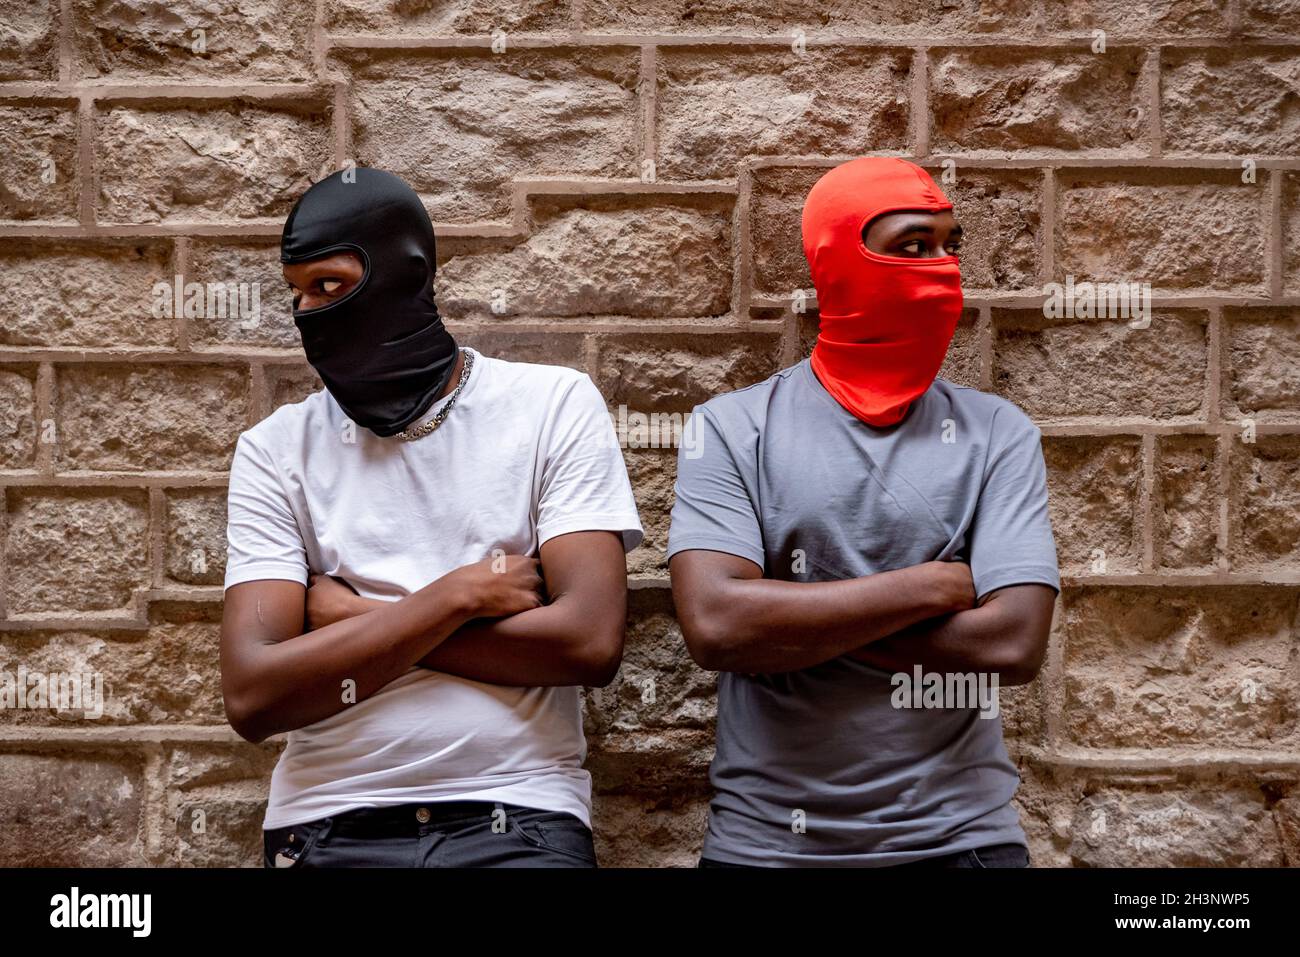 Two afro young men in ski masks in alleyway Stock Photo - Alamy